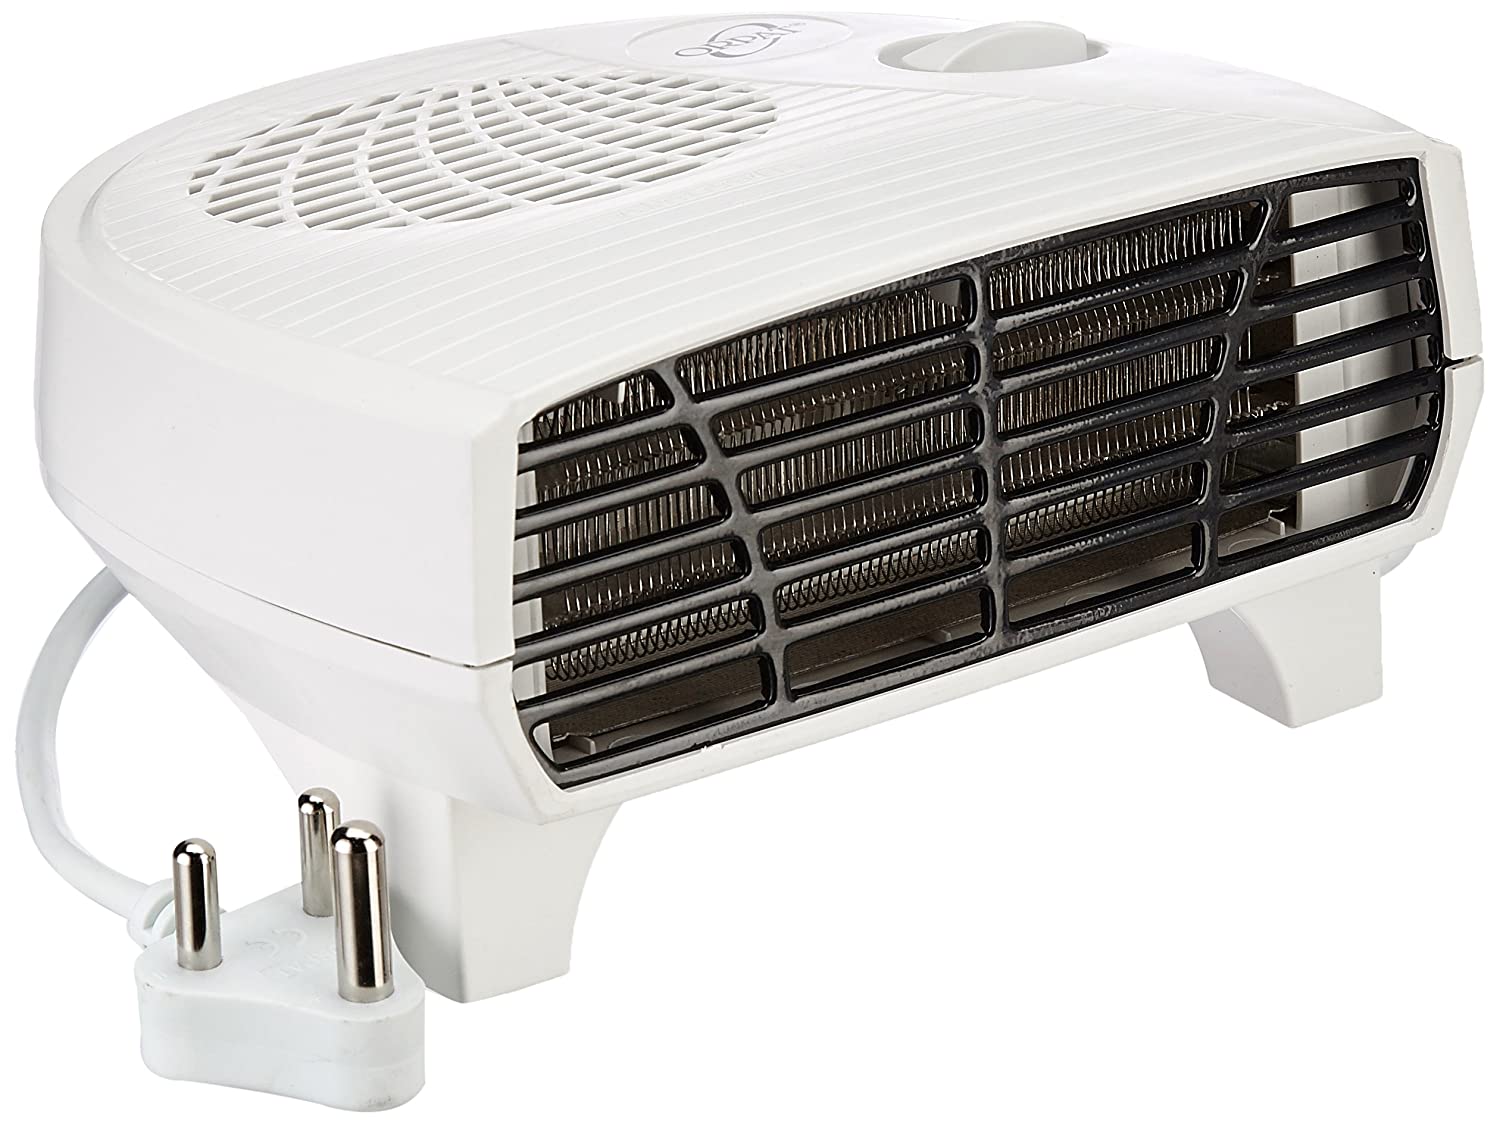 Orpat oeh 1220 room heater review